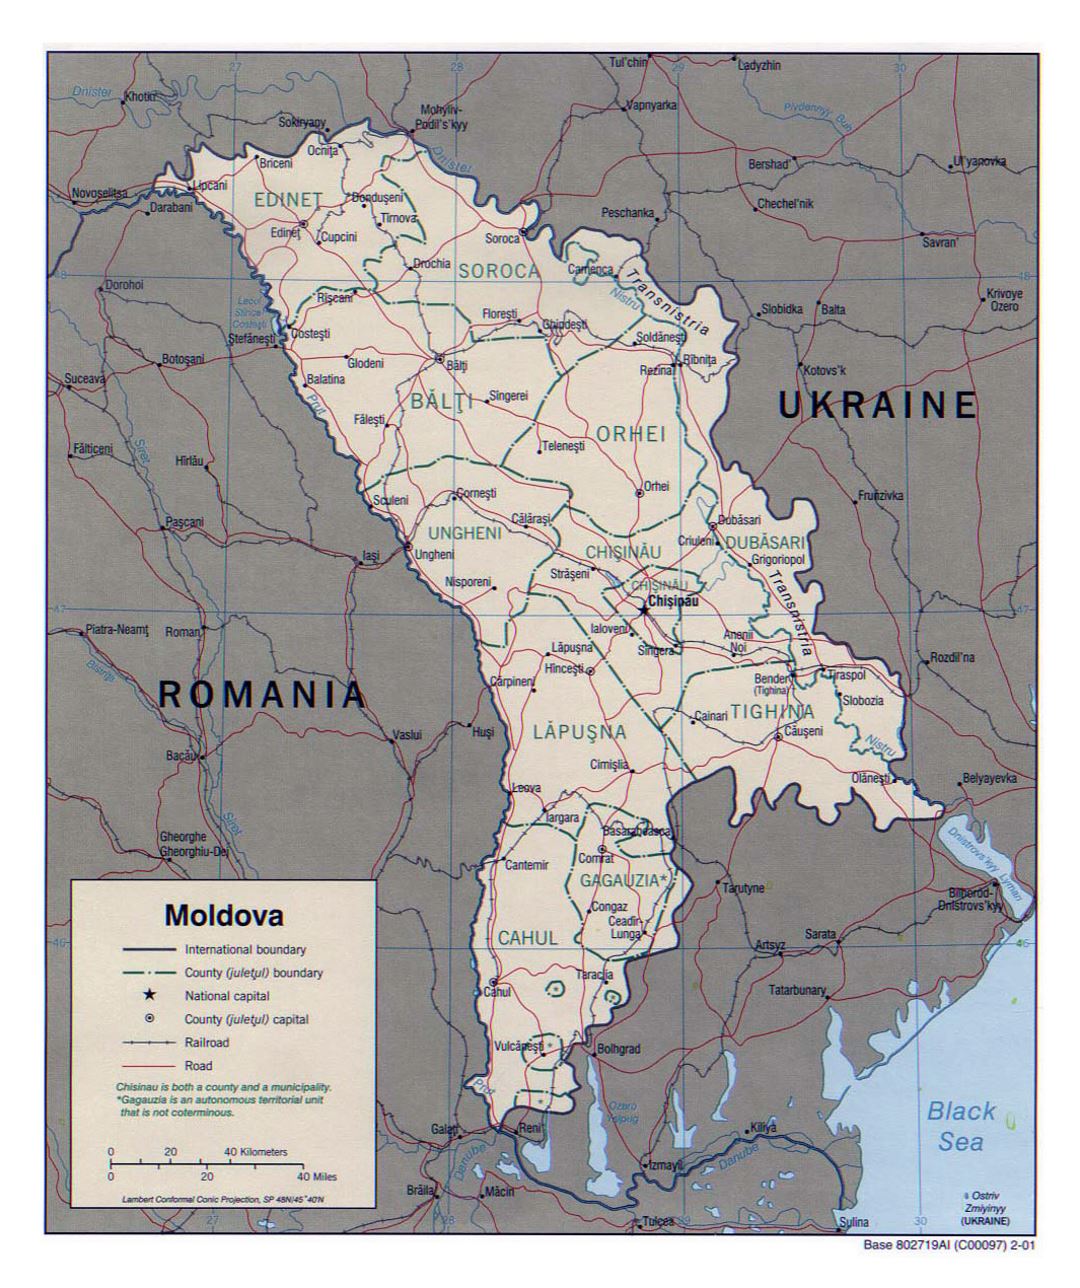 Detailed political and administrative map of Moldova with roads, railroads and major cities - 2001